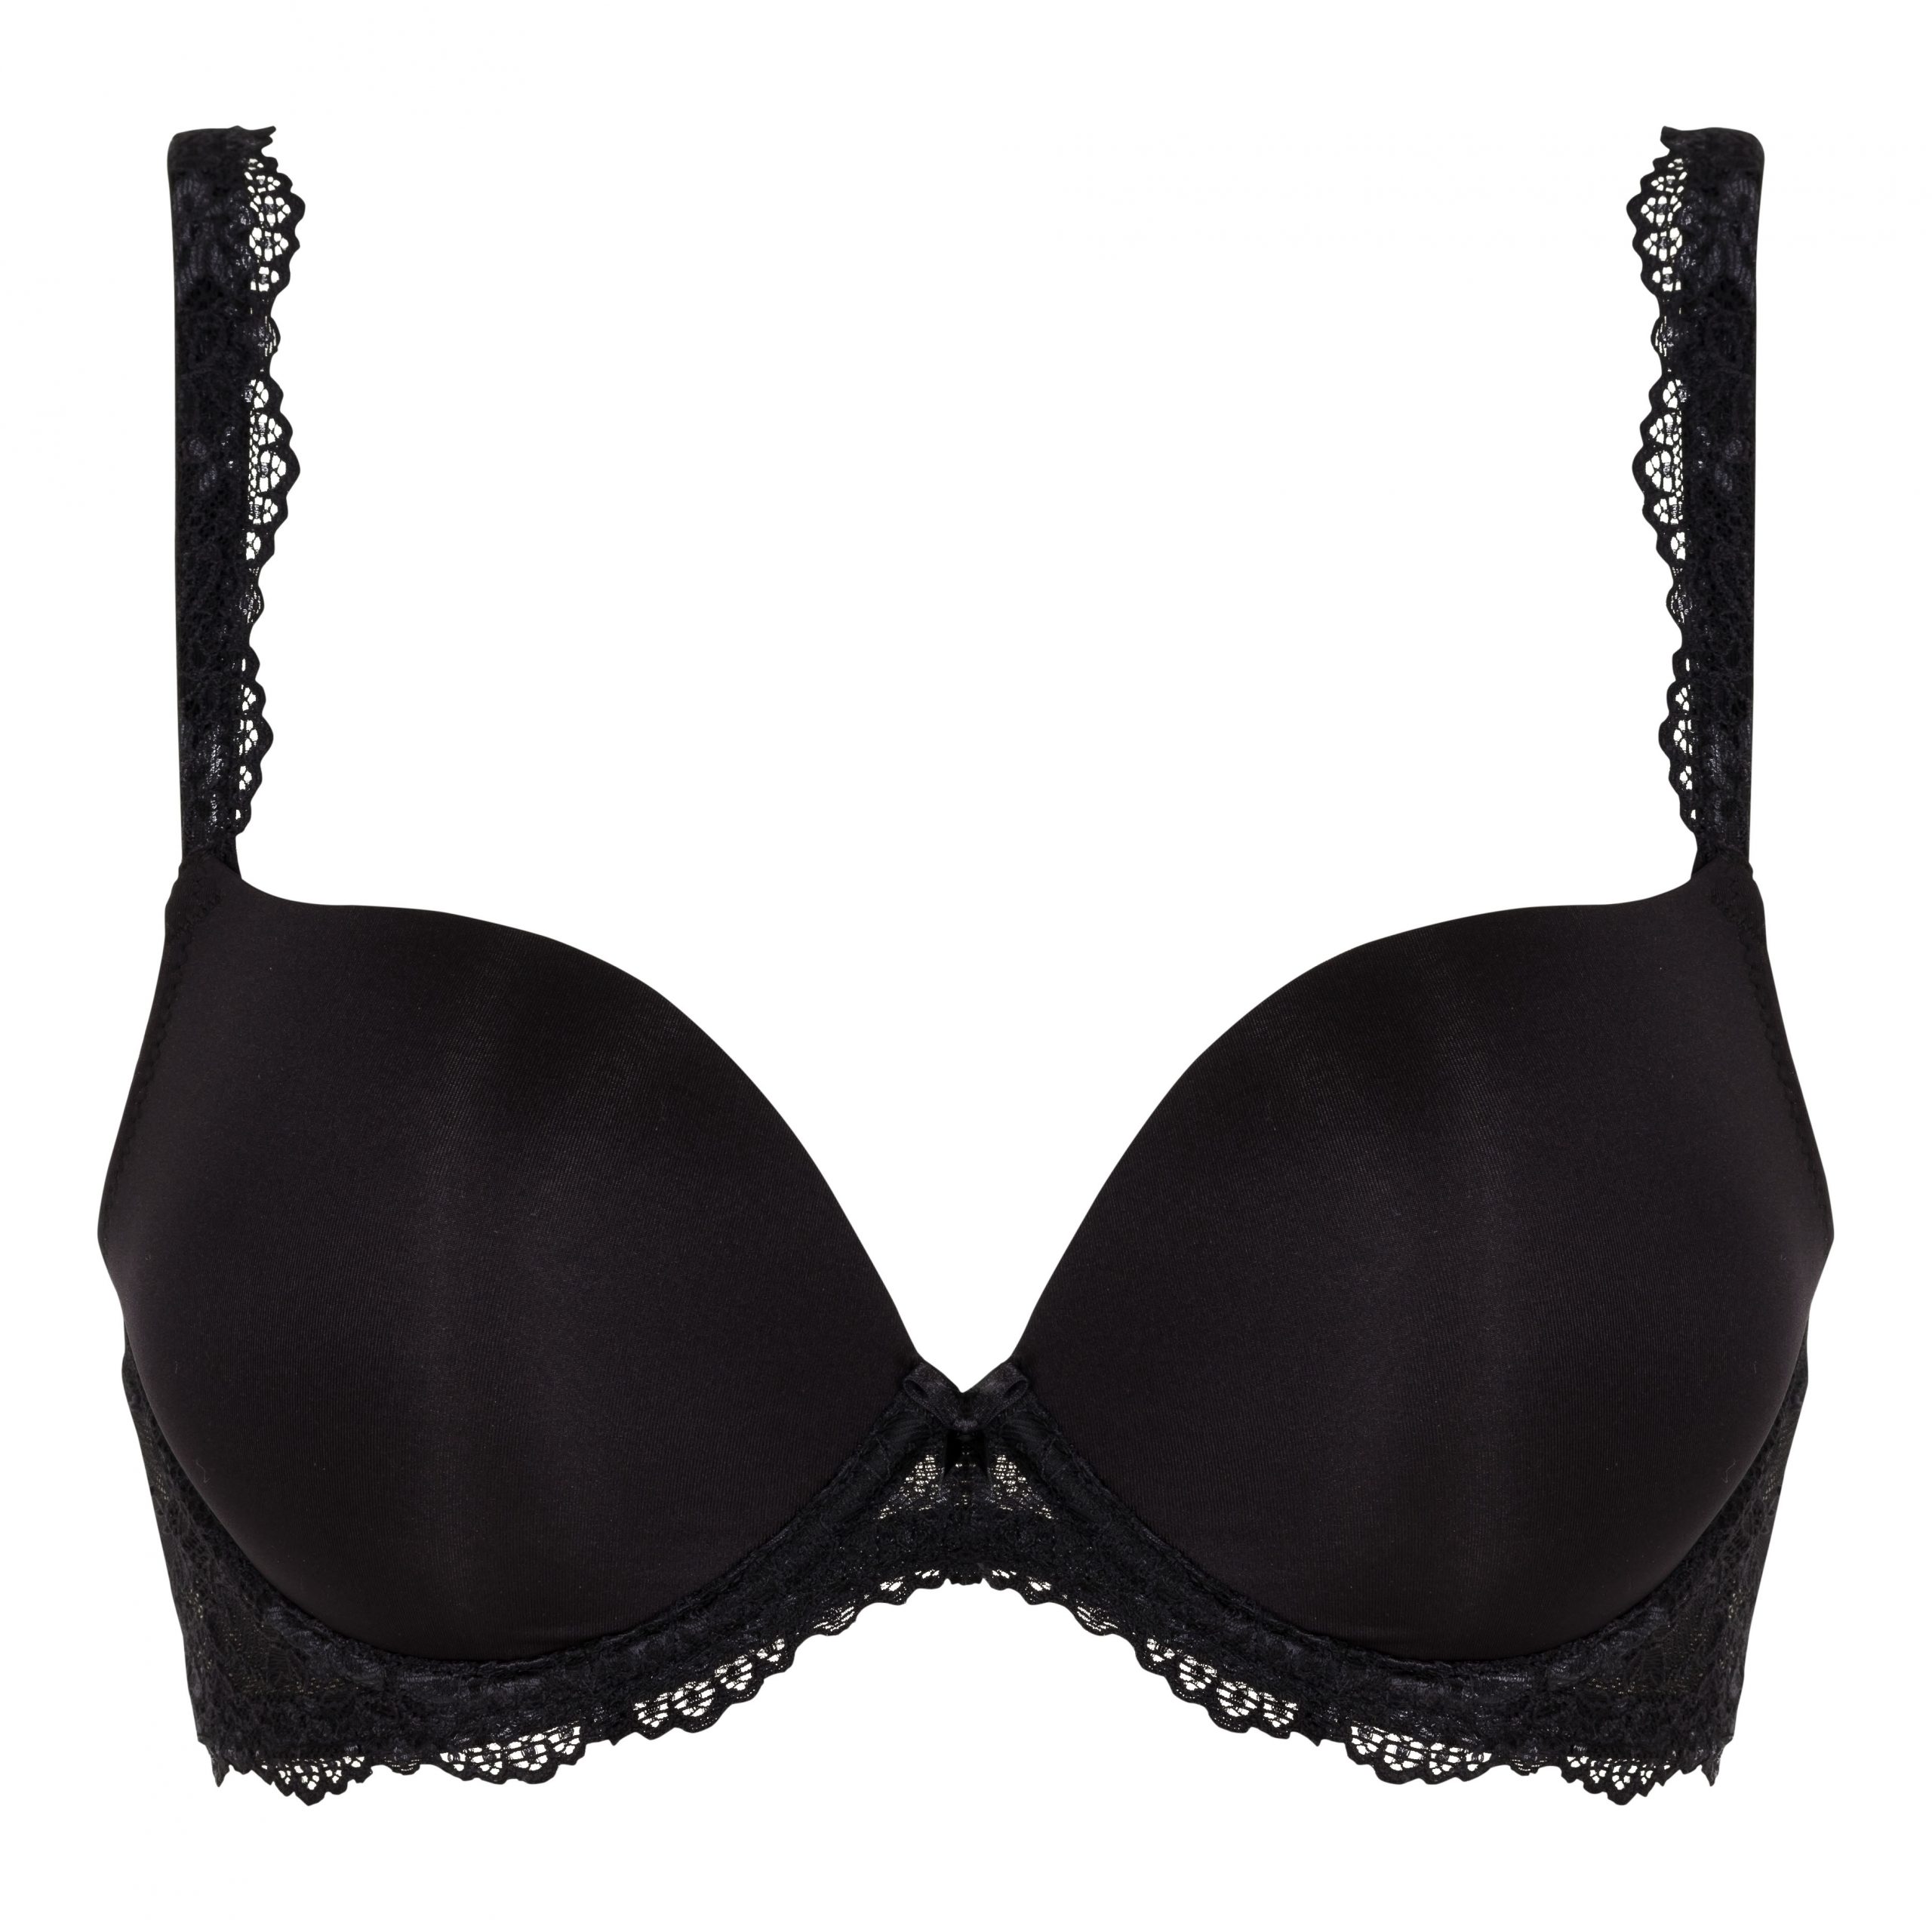 LINGADORE Push Up T-Shirt bra A-DD cups in bands 8-16 - Arianne Lingerie